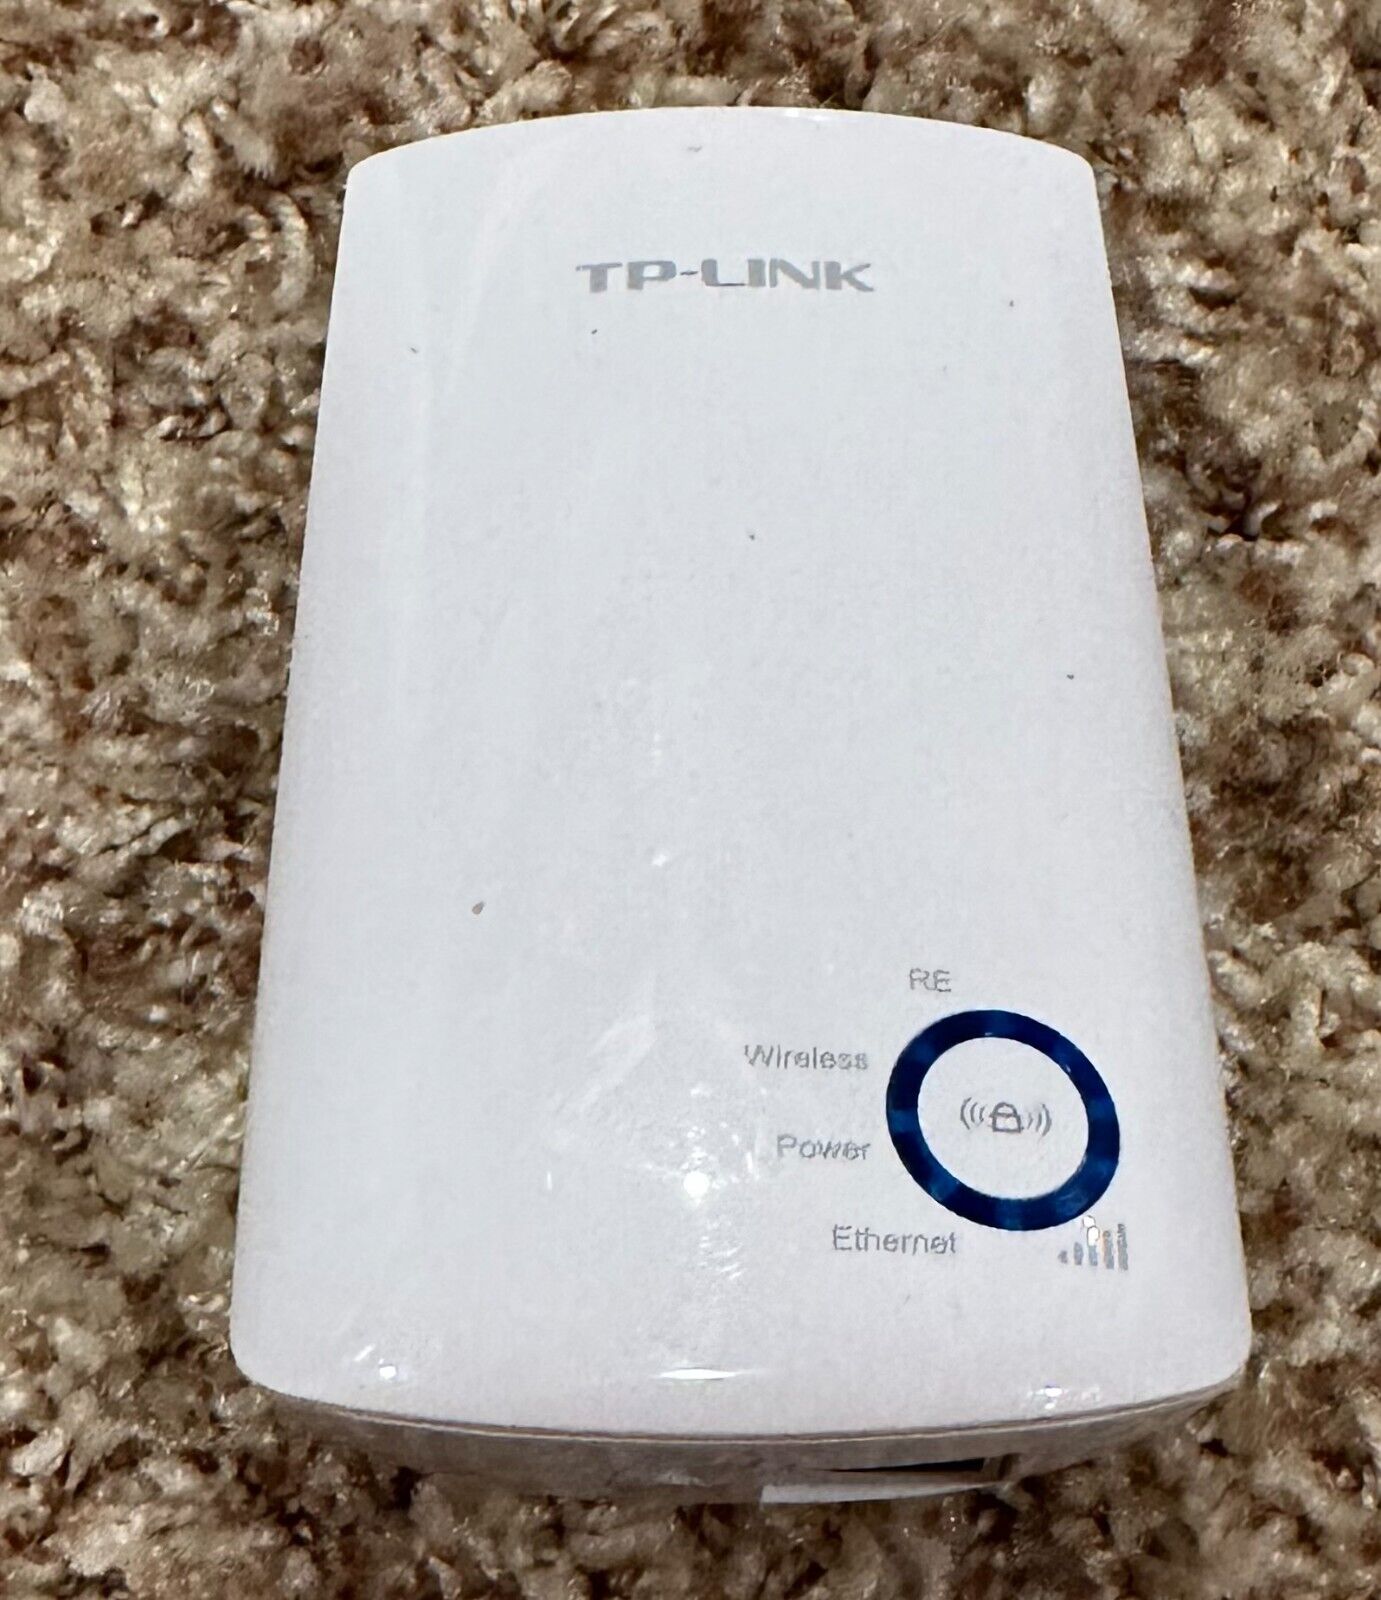 TP-Link TL-WA850RE N300 300Mbps Universal WiFi Range Extender, Repeater, Booster